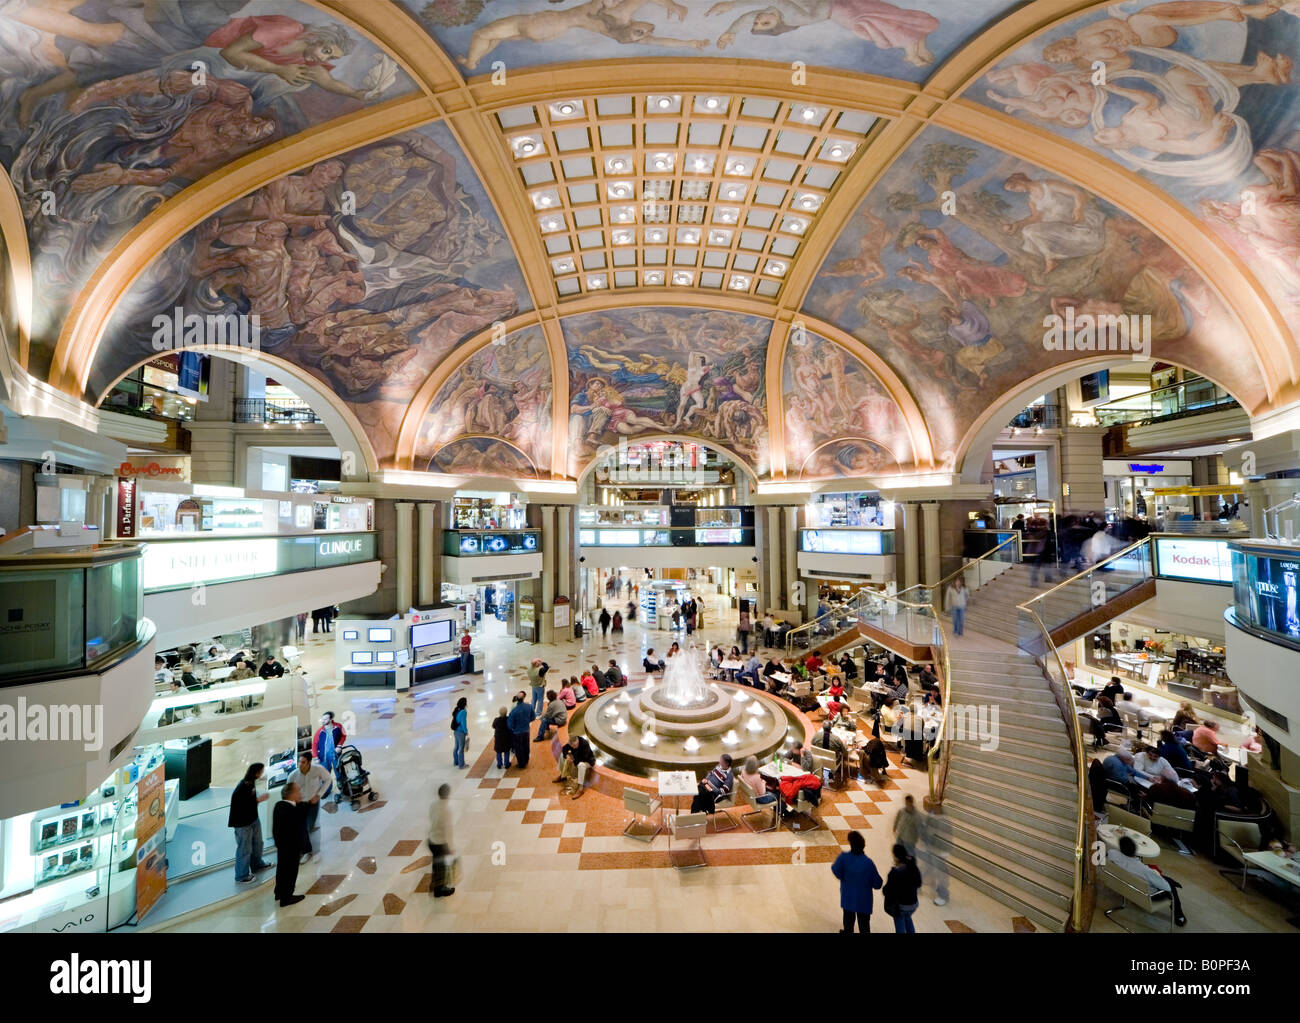 The World Famous Fresco Ceiling Paintings In The Galeria